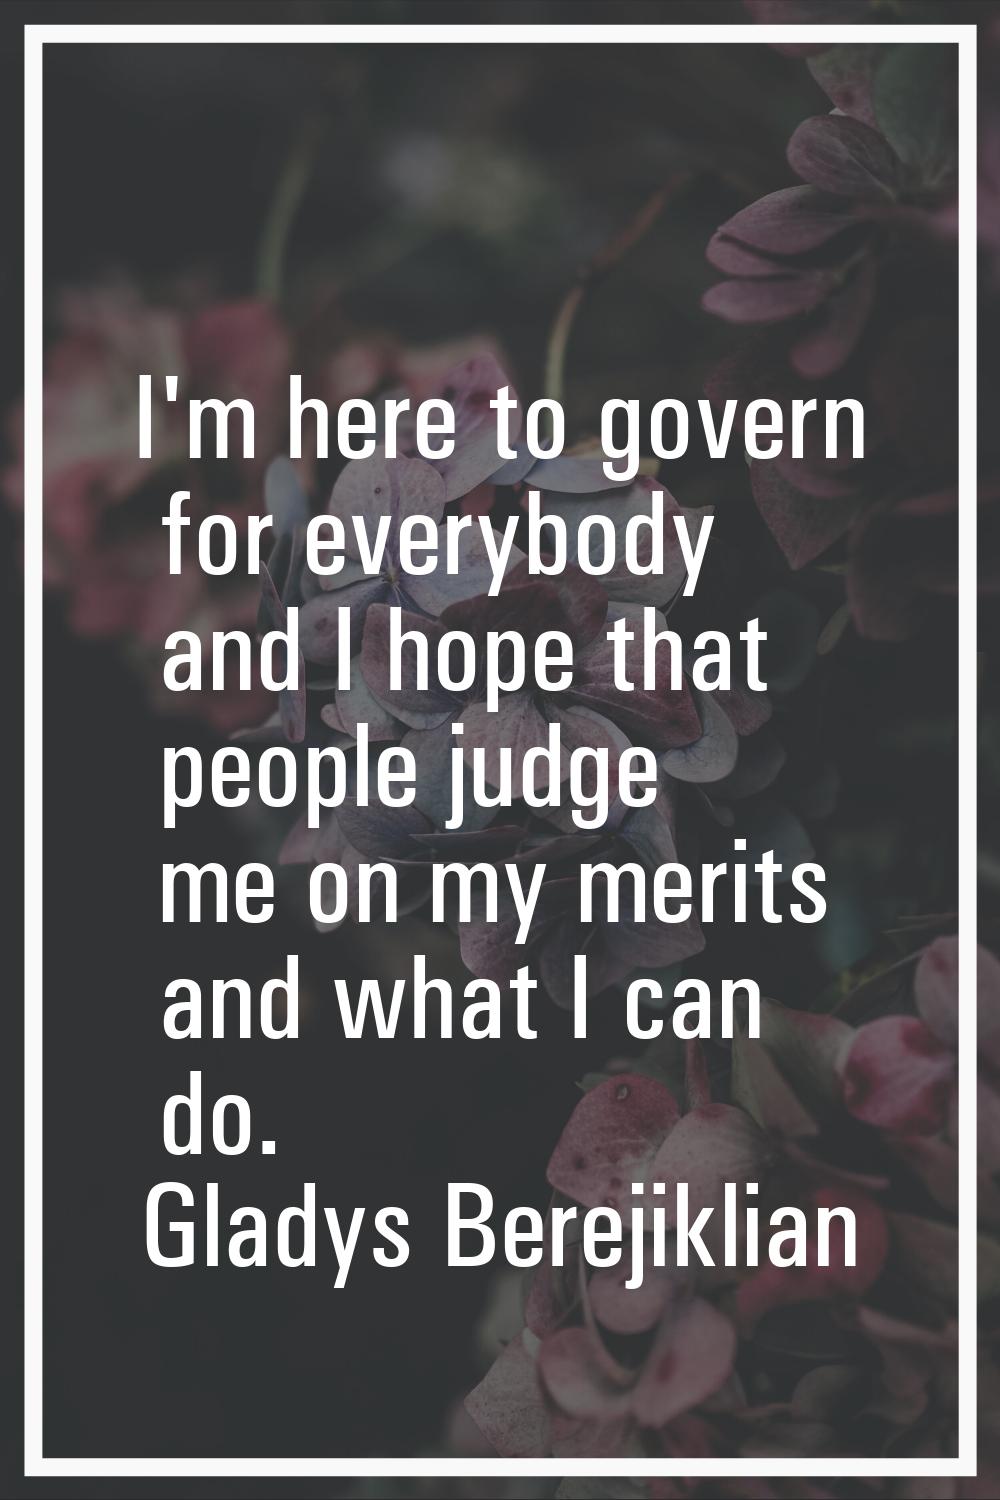 I'm here to govern for everybody and I hope that people judge me on my merits and what I can do.